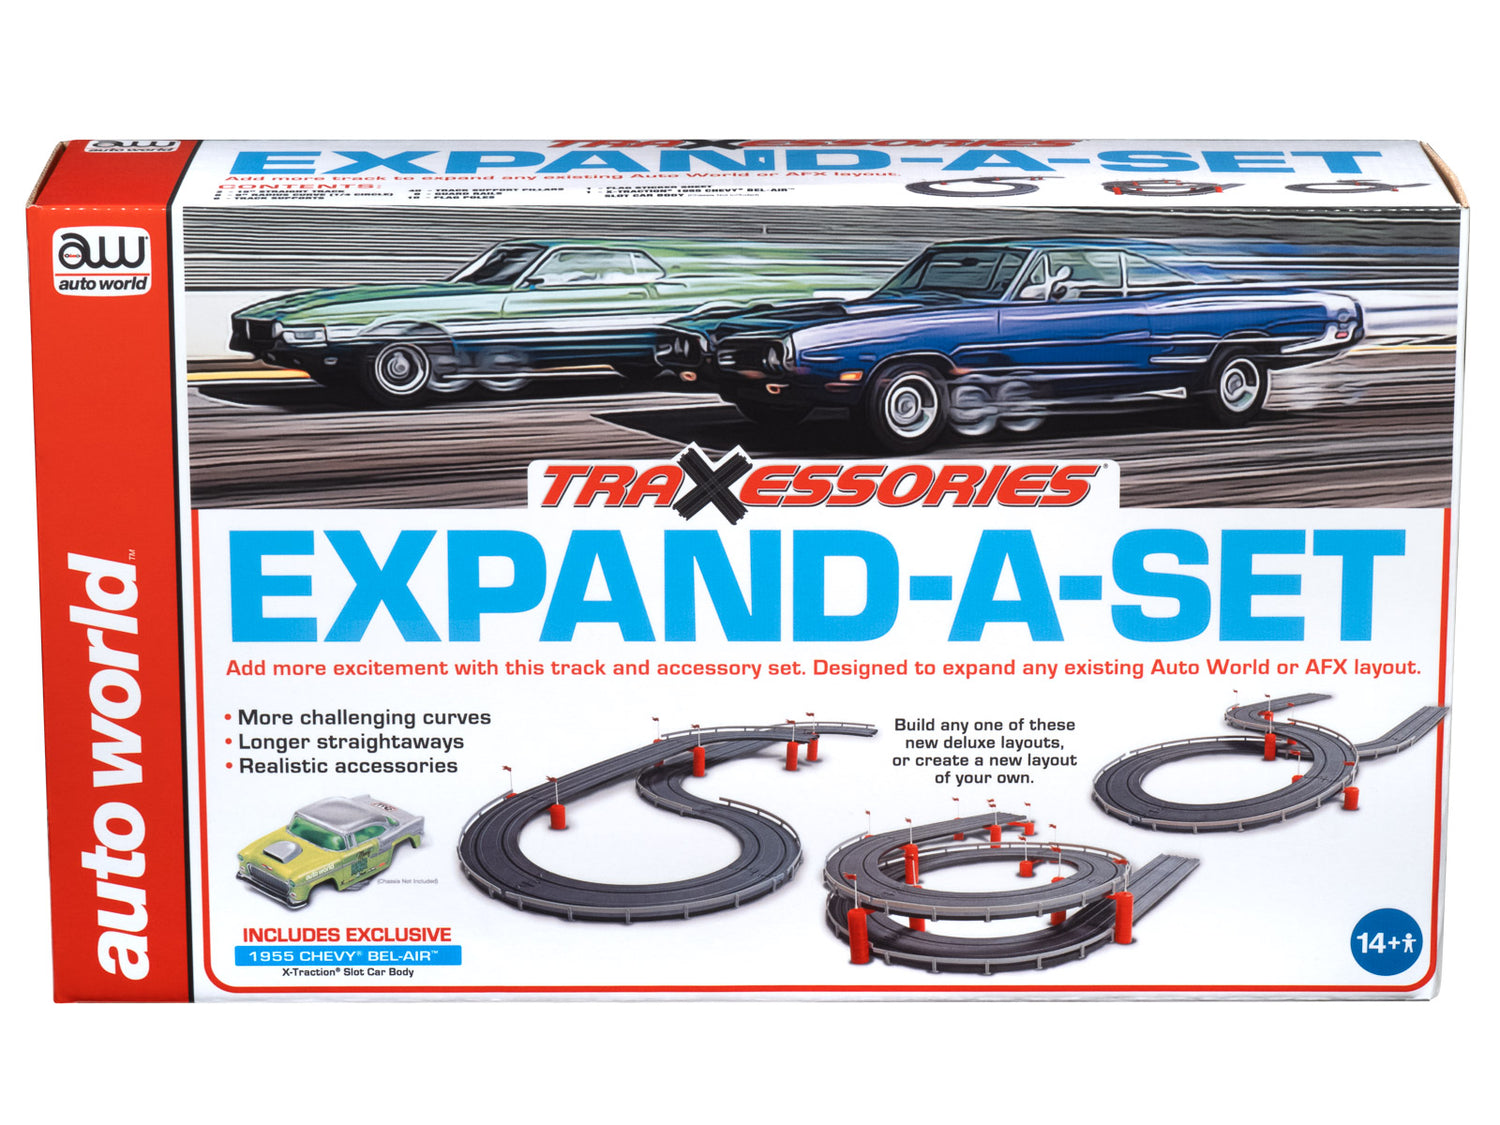 Auto World 7' Track & Accessory Expand-A Set w/XT 1955 Chevy Bel Air Gasser Body HO Scale